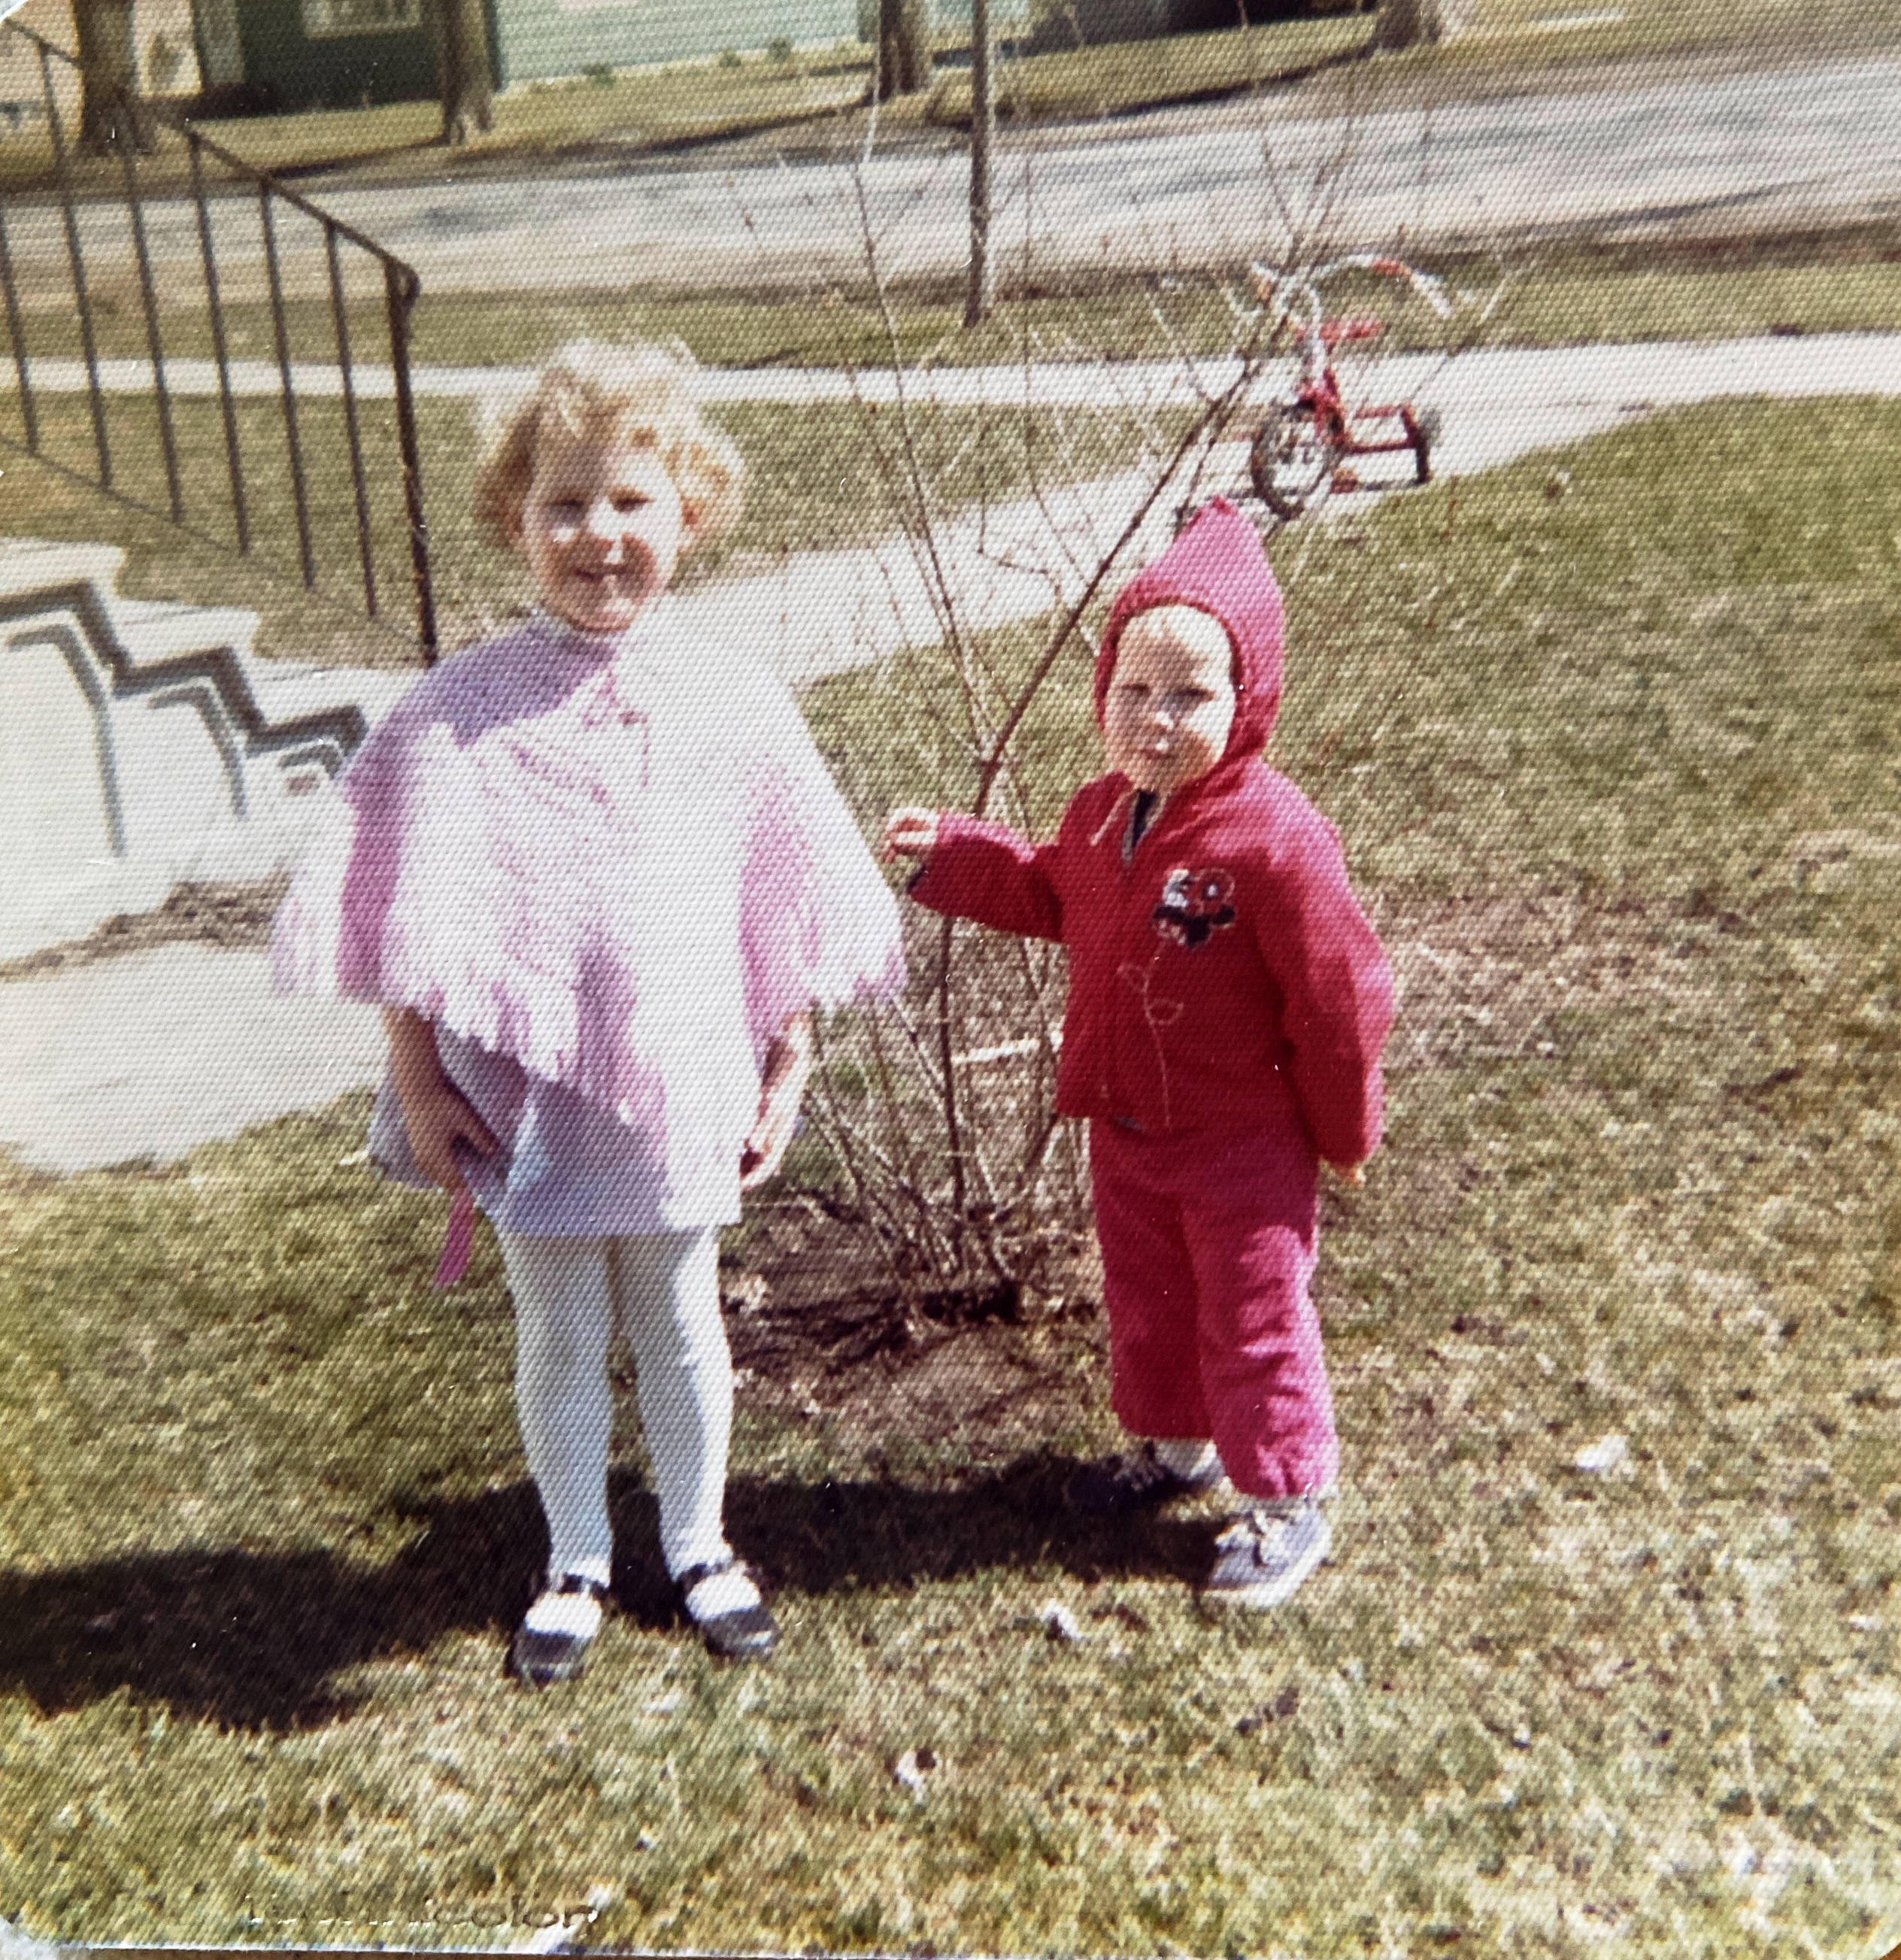 Julie and Kathie in front of our house on 11th St. spring of 1972